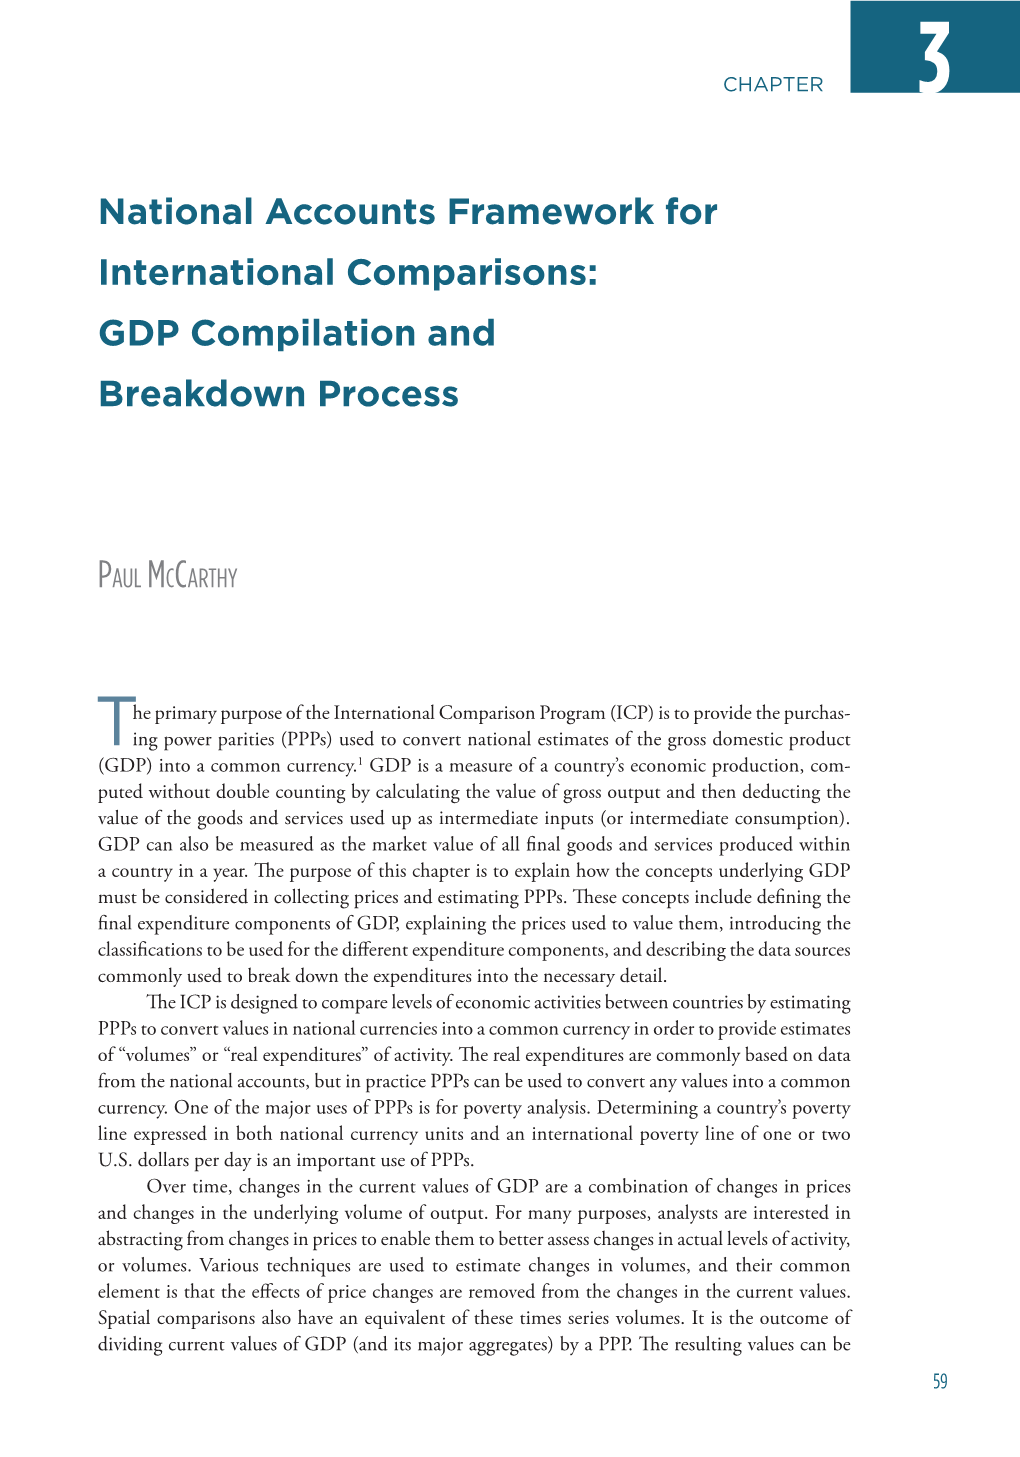 National Accounts Framework for International Comparisons: GDP Compilation and Breakdown Process